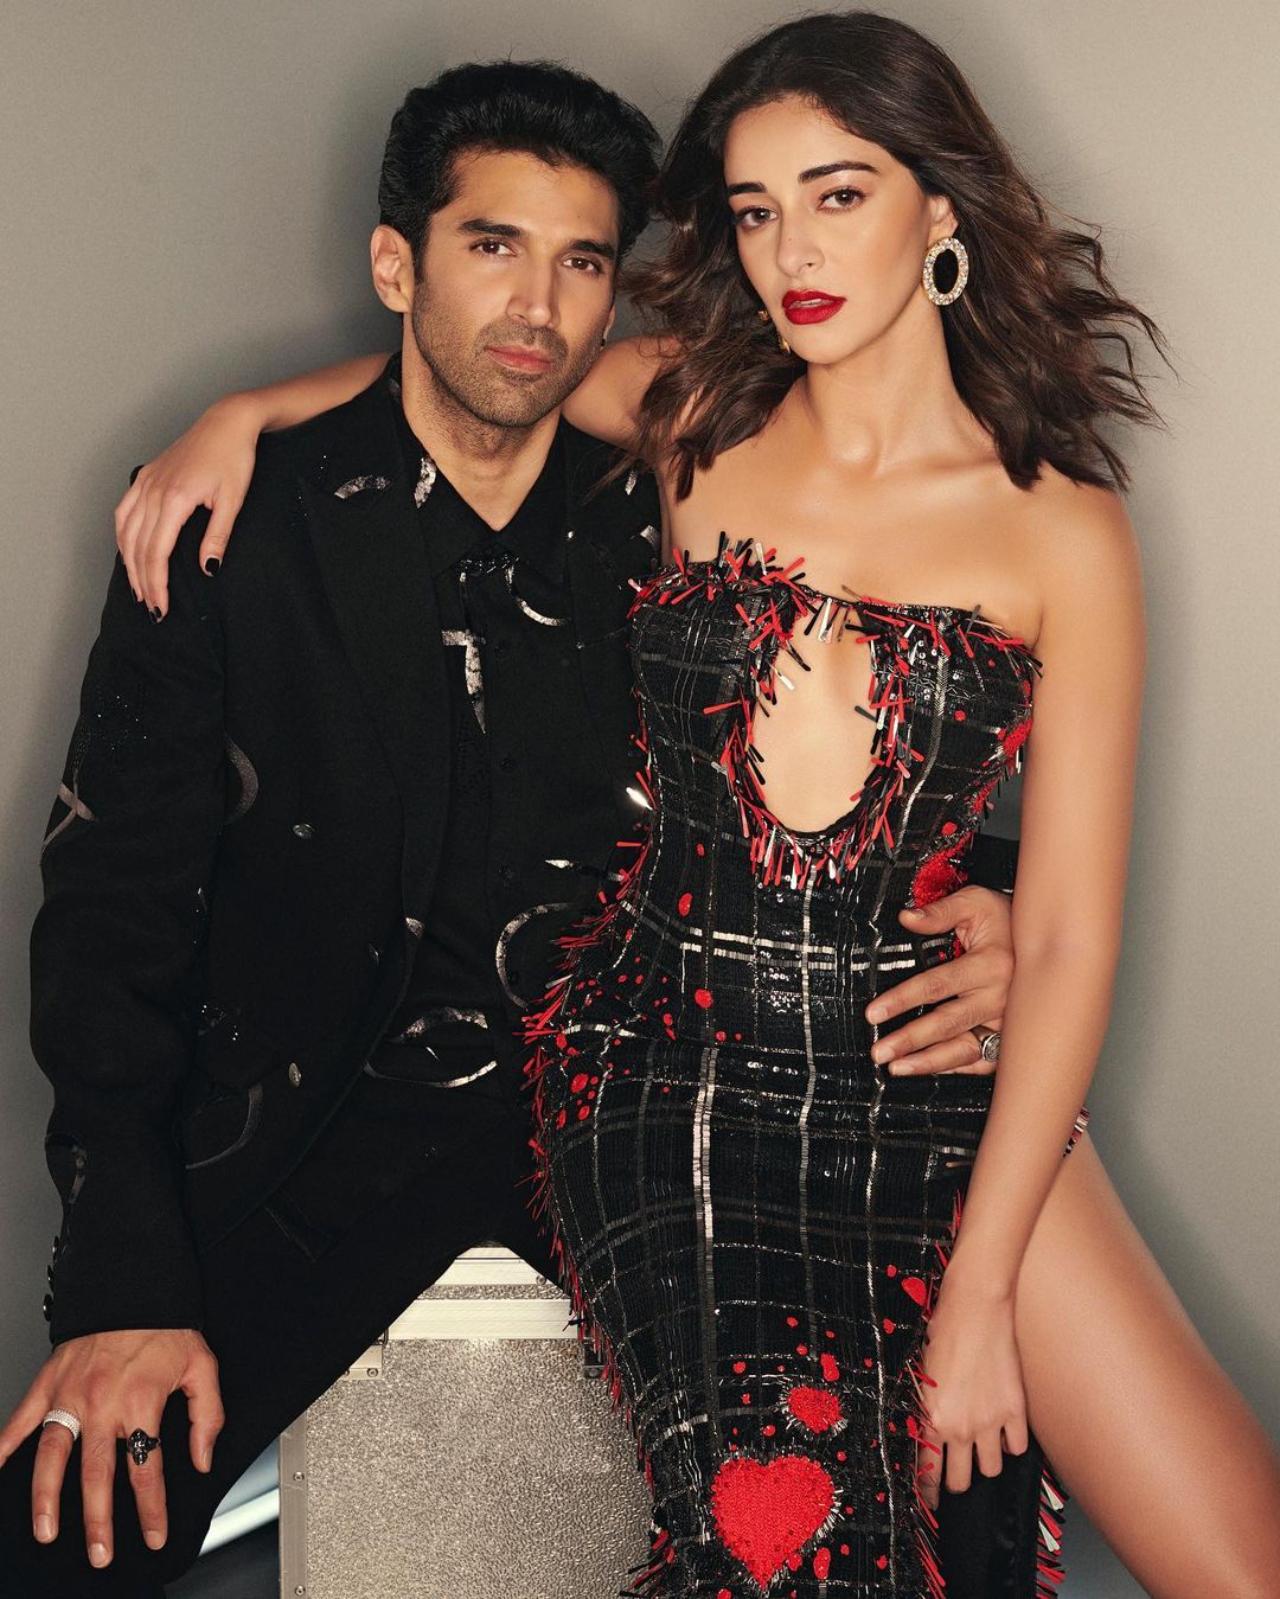 Aditya and Ananya first sparked rumours when they posed together at Kriti Sanon's Diwali party. Prior to that, there were rumours that the two were seen getting cosy at Karan Johar's 50th birthday